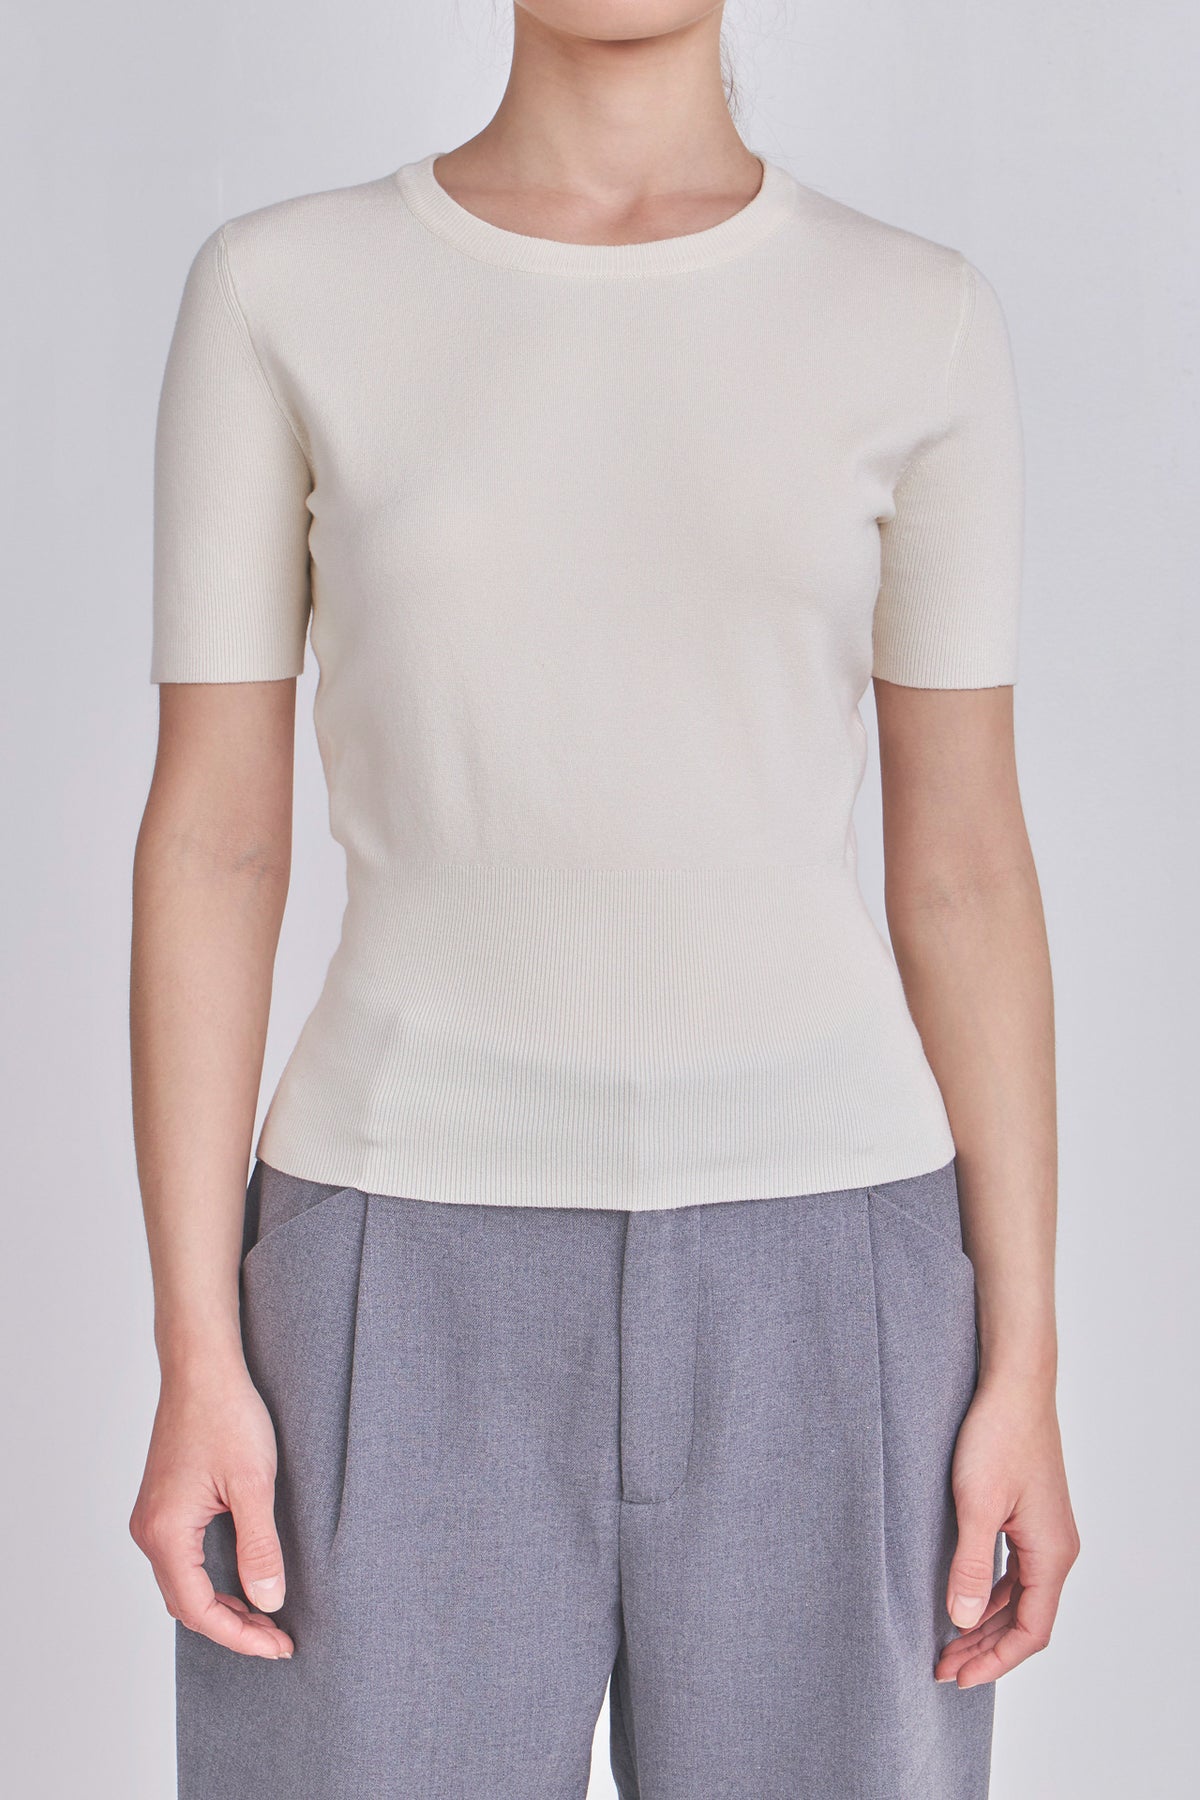 ENDLESS ROSE - Jewel Trim Half Sleeve Top - SWEATERS & KNITS available at Objectrare